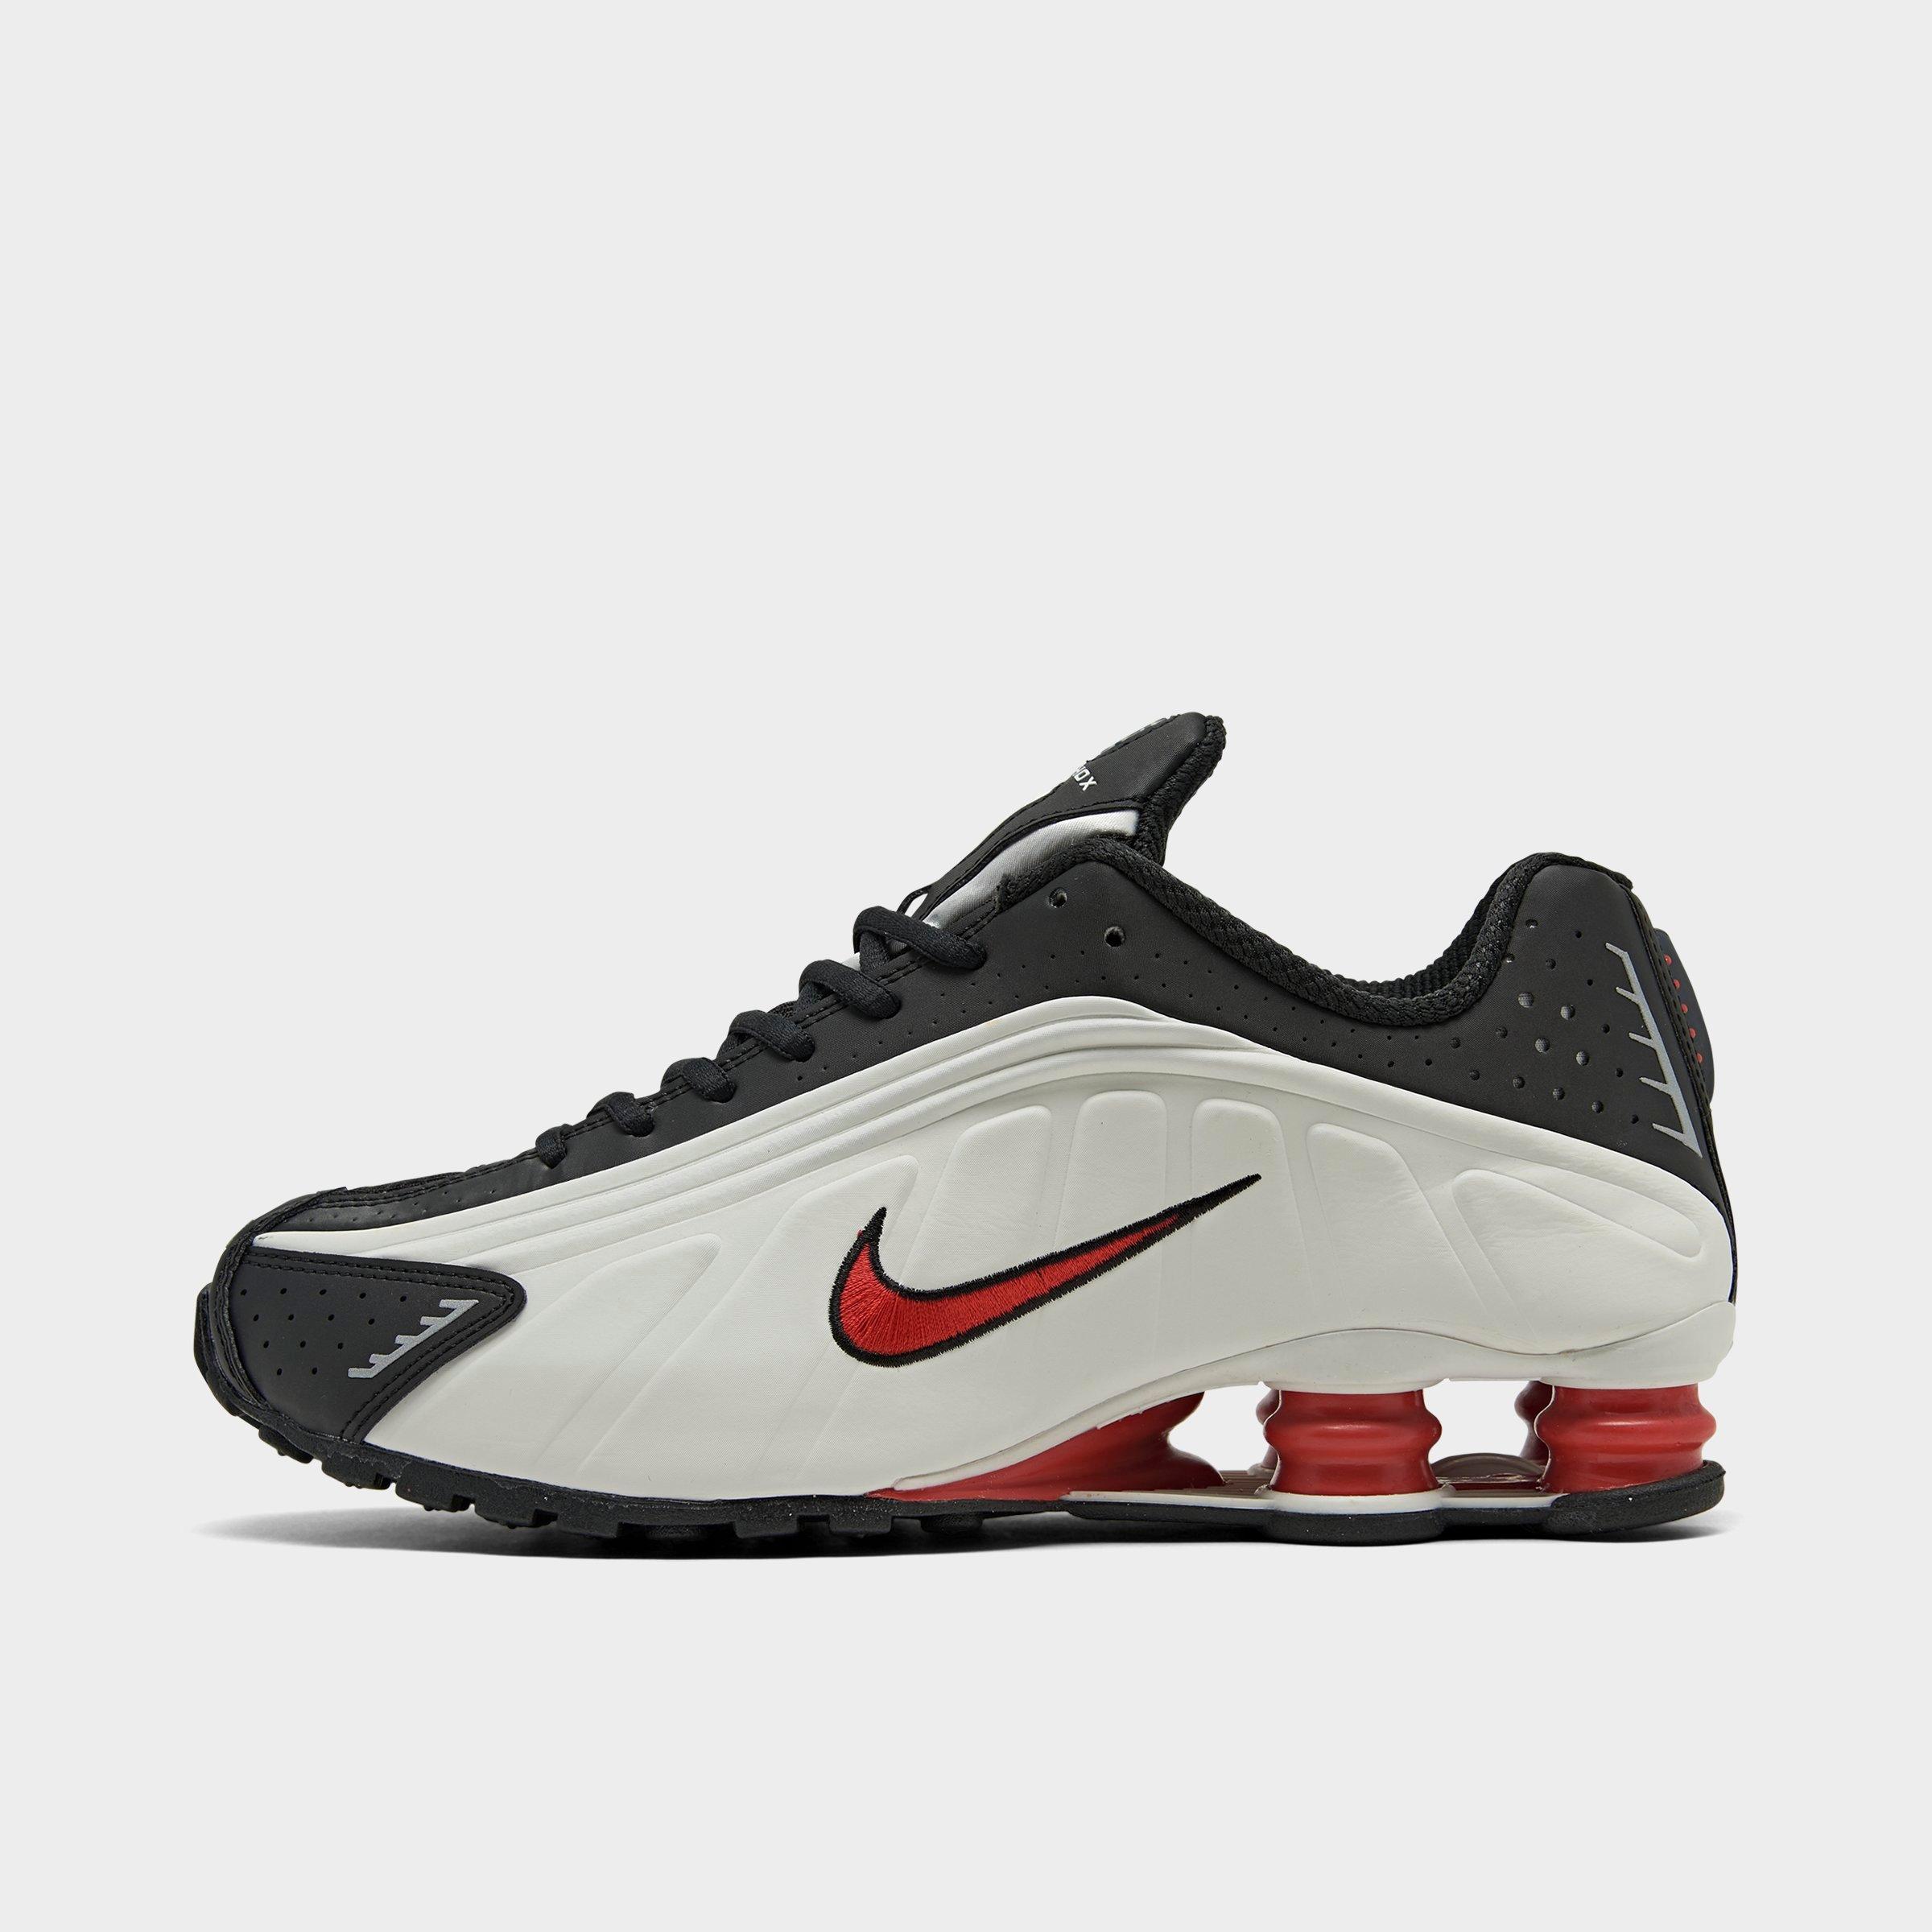 red and white nike shox